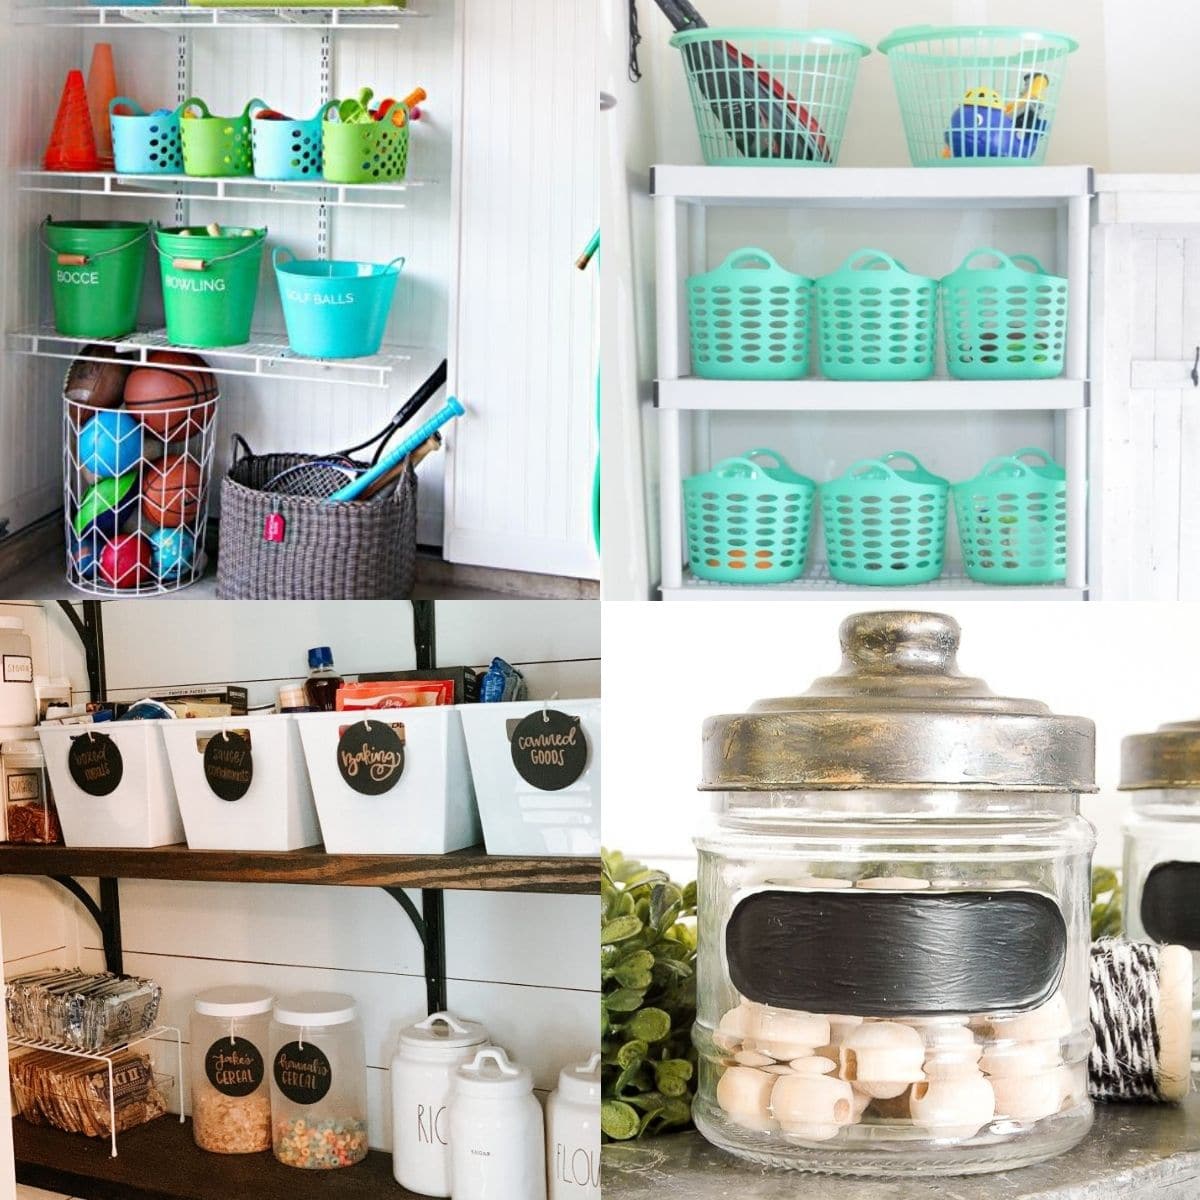 Increase storage with these Dollar Tree storage hacks.

These simple organizing tips are fun, budget-friendly, and look extra cute. 😉

#Storage #StorageIdeas #DollarTree #DollarTreeStorageIdeas
 #37385realestate
 LocalInfoForYou.com/152867/dollar-…